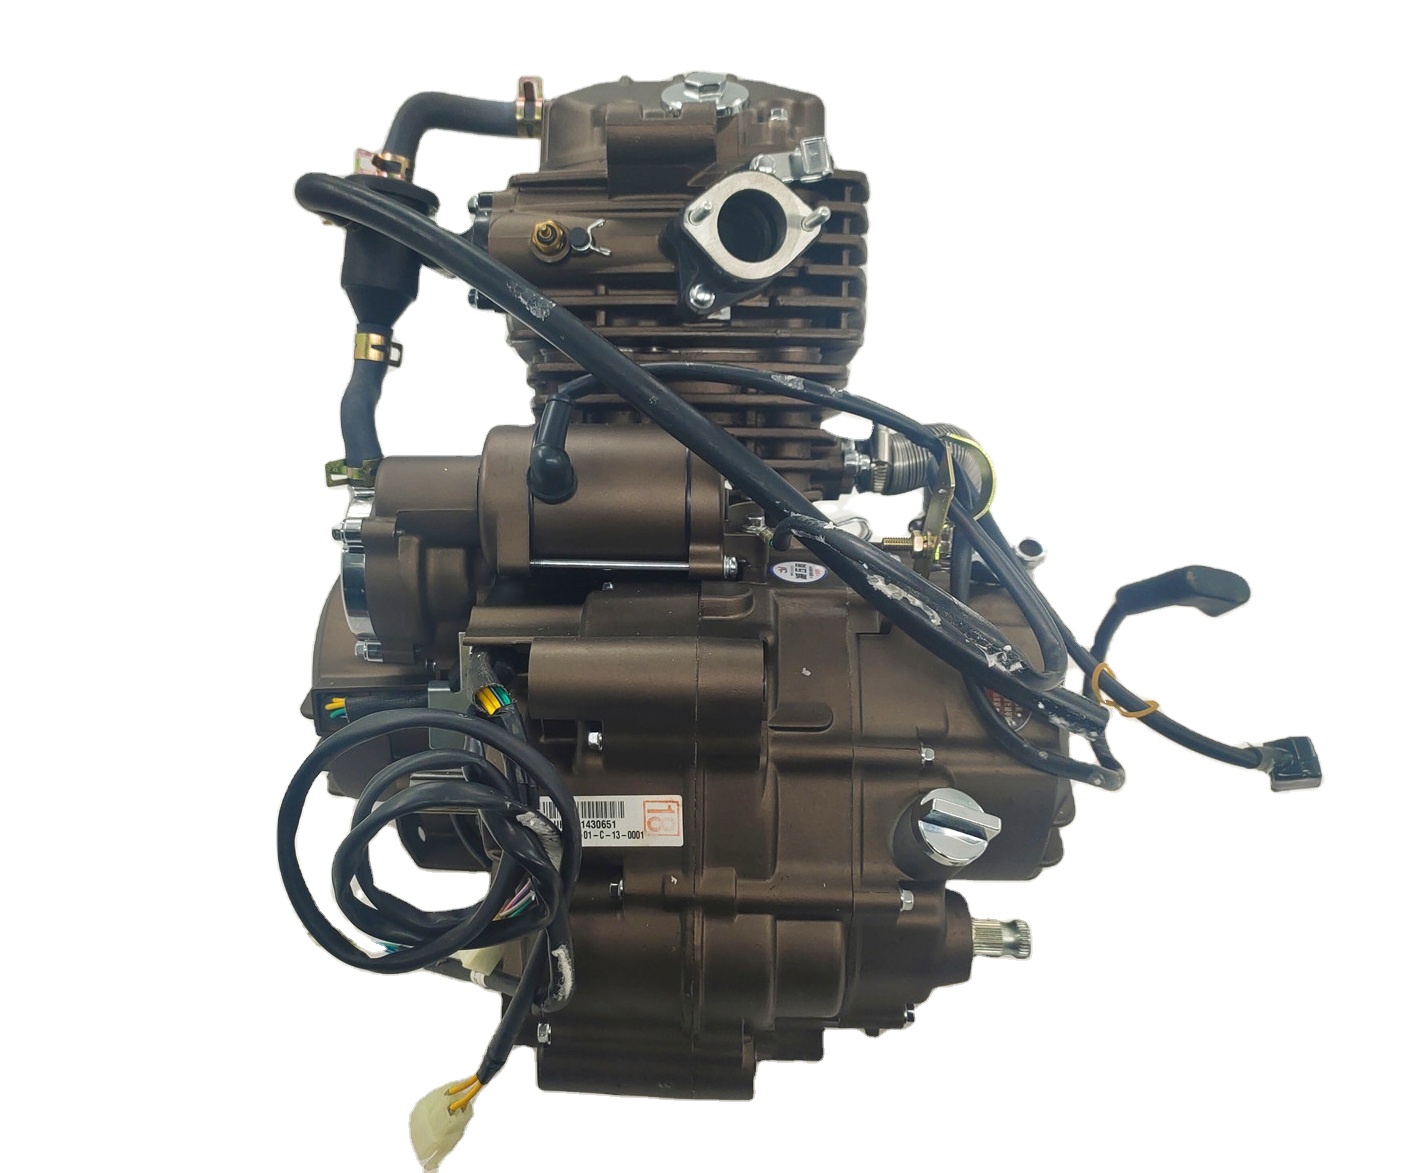 DAYANG the thirdgeneration Windrunner 320cc Motorcycle engine Assembly Single Cylinder Four Stroke Style  China  Origin Quality